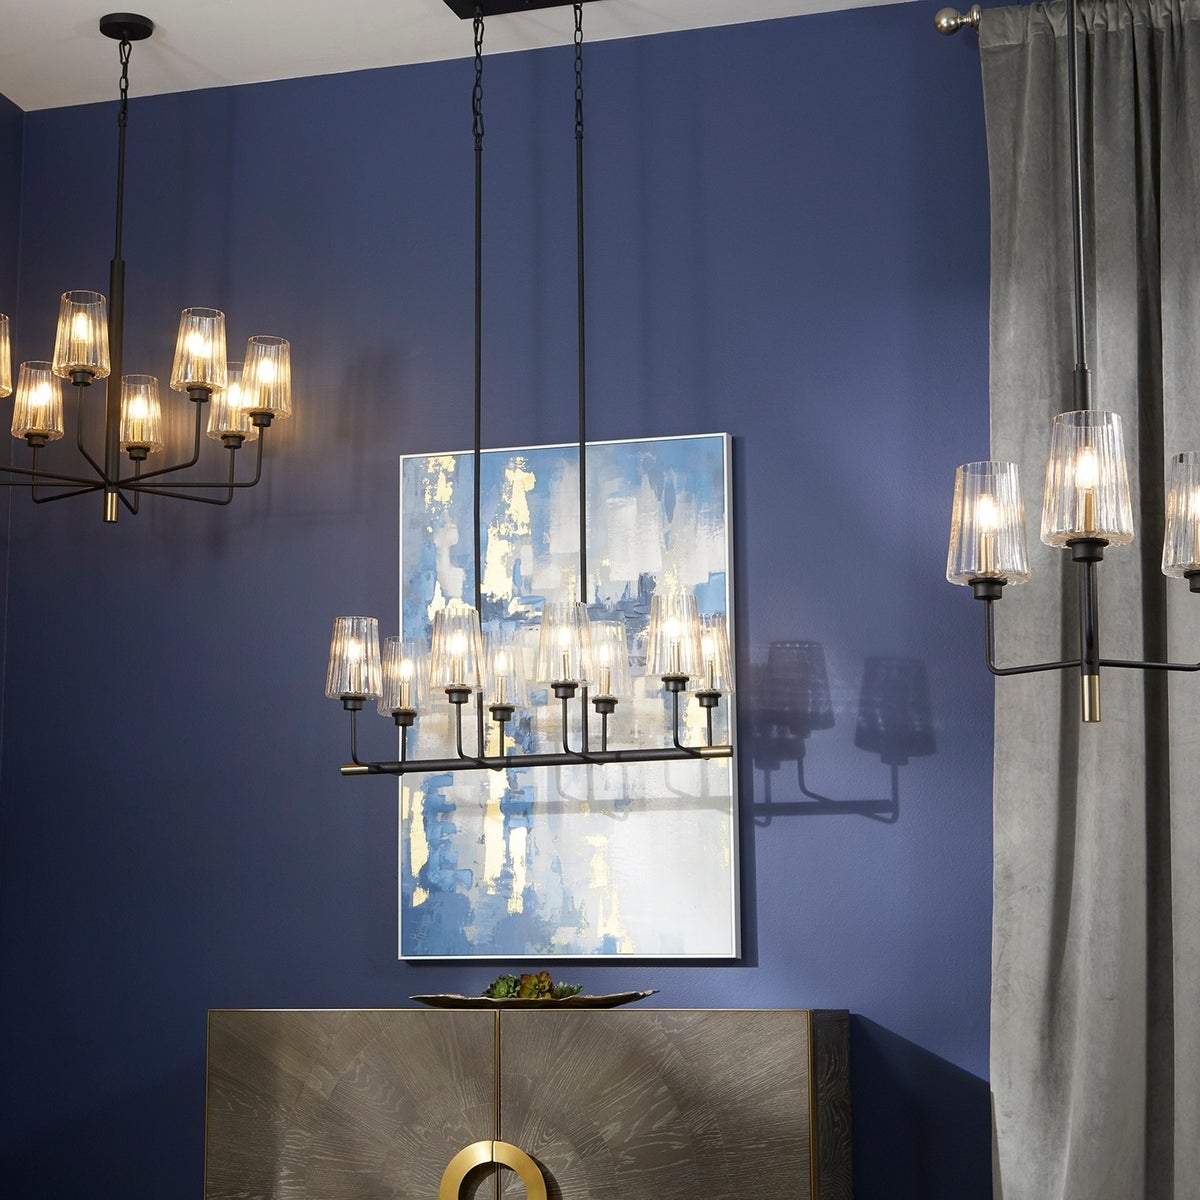 Bathroom chandelier with tulip-shaped, clear fluted glass shades. Minimalist-inspired design with soft-angular curves. Adjustable chain/stem hung suspension system. Suitable for bathrooms, outdoor kitchens, and covered patios. 19"W x 20"H. 2-year warranty.